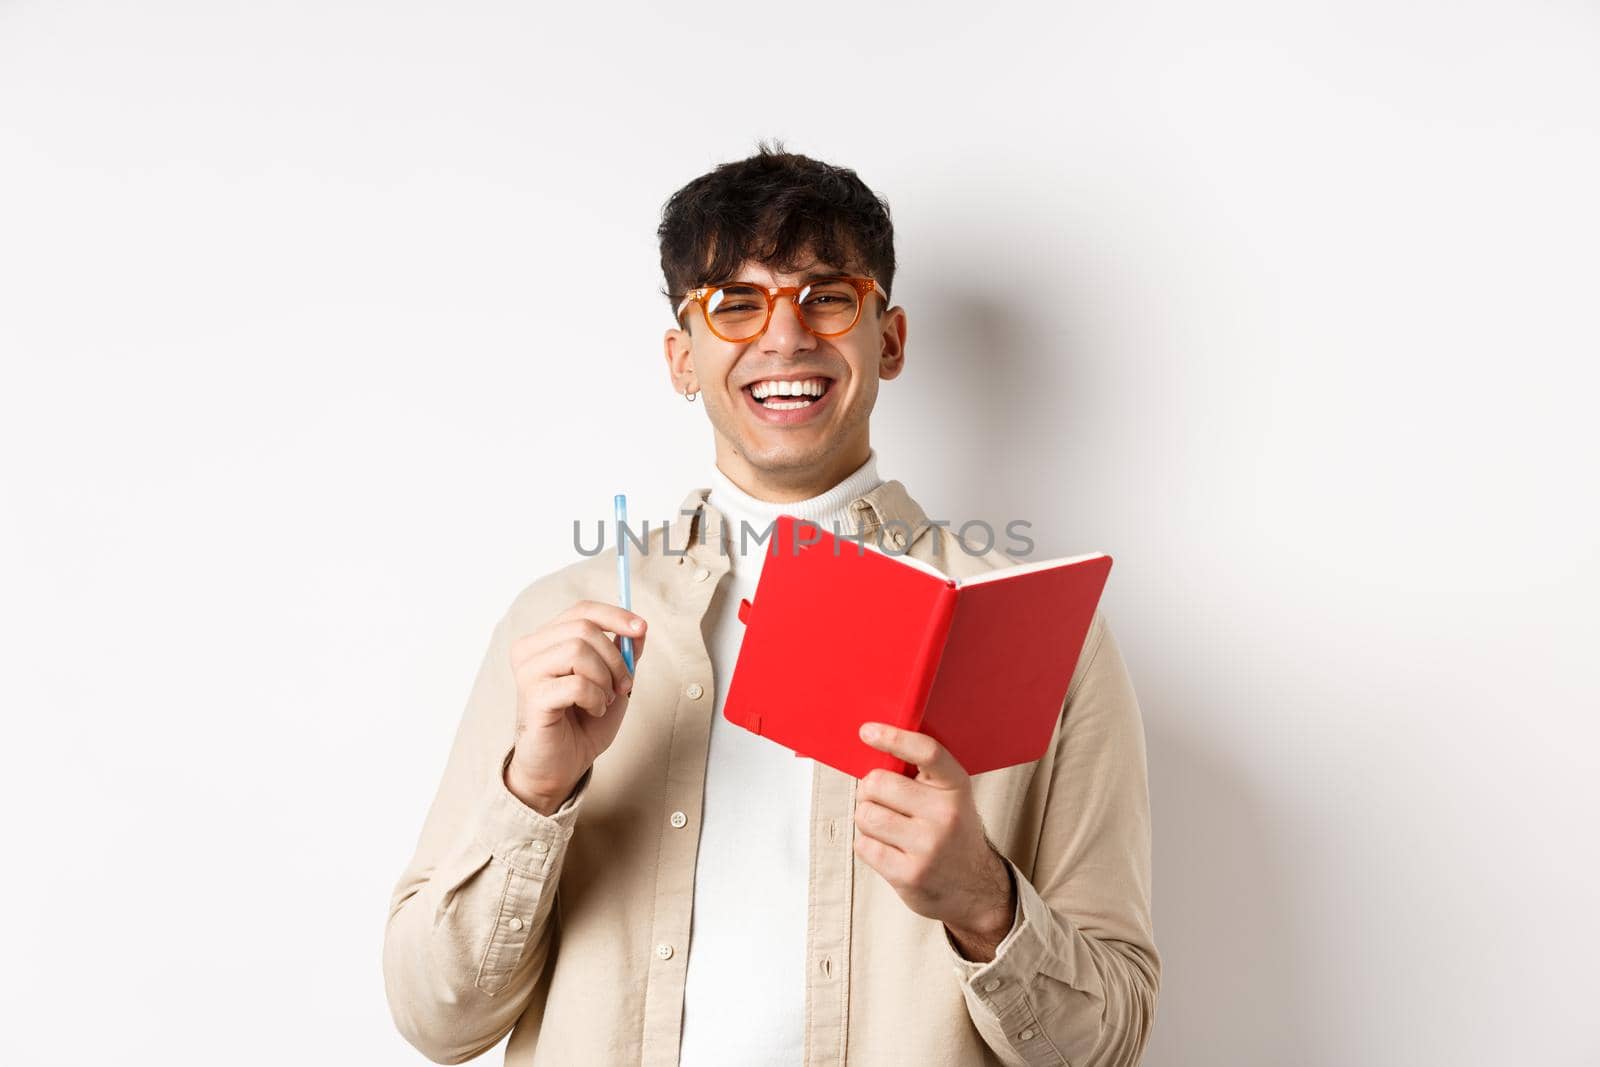 Cheerful young man in glasses laughing and taking notes, writing down in planner, holding pen and diary, standing on white background.